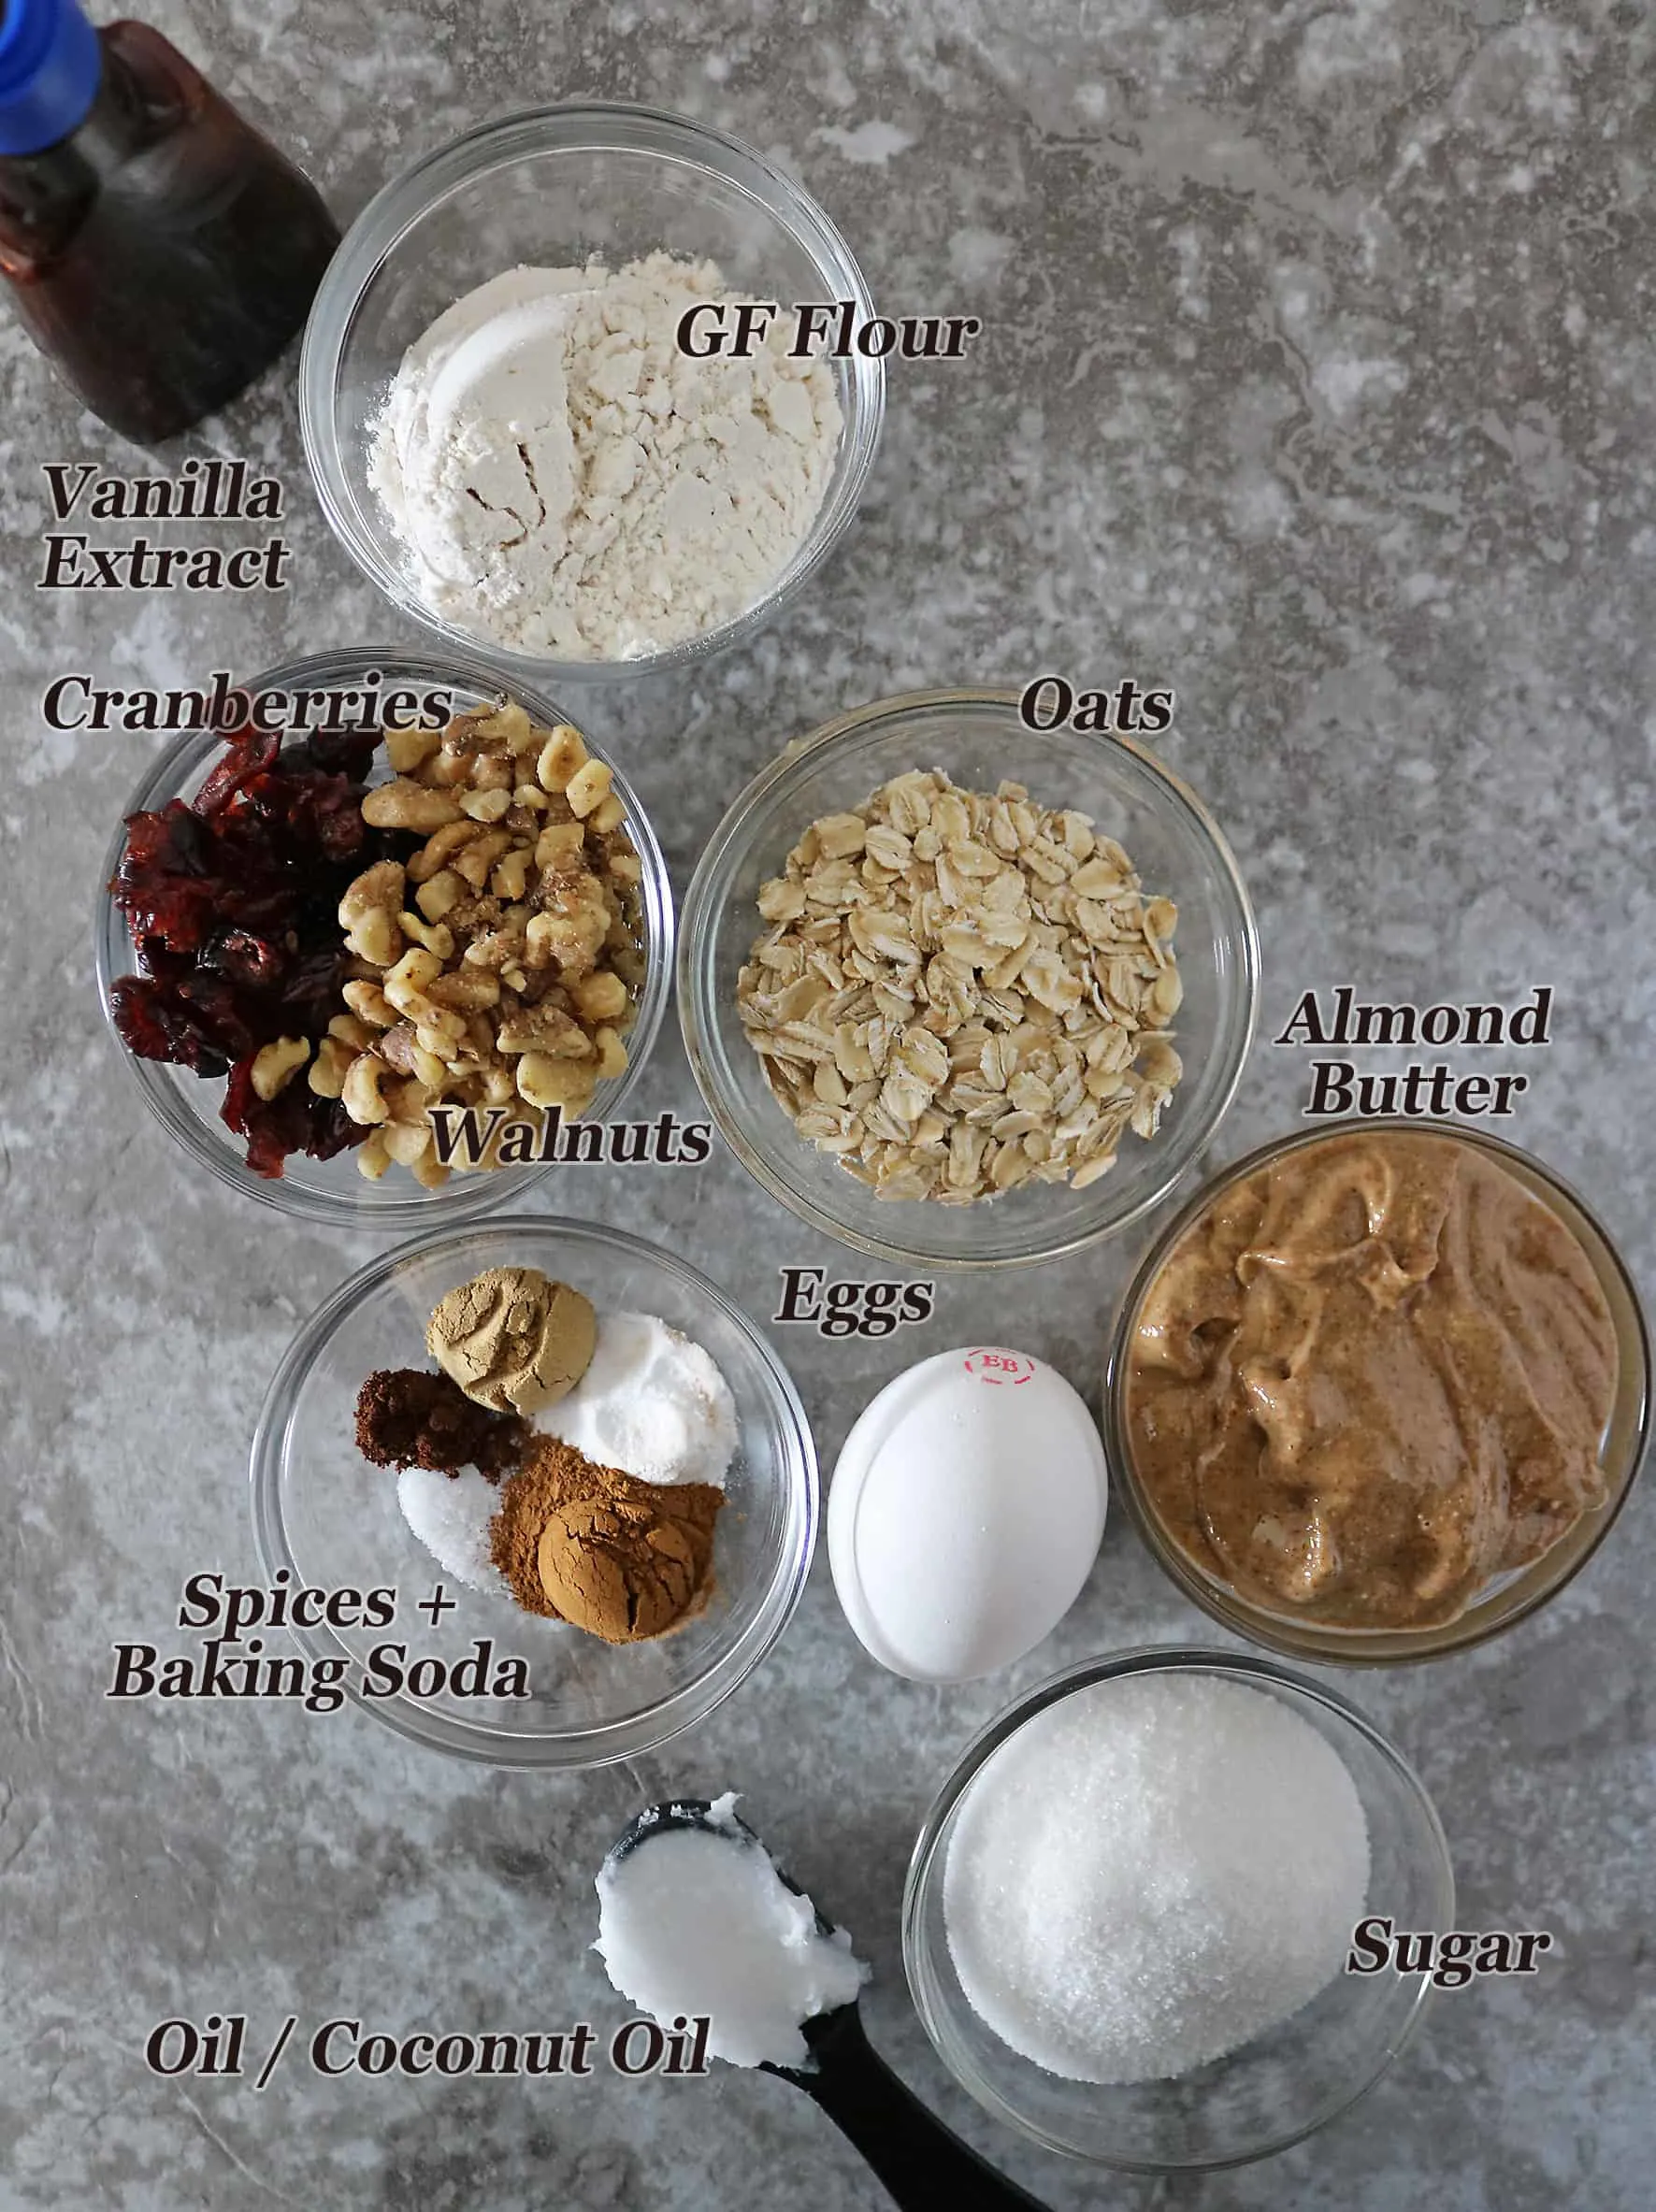 Ingredients for Oatmeal Cranberry Cookies for holidays